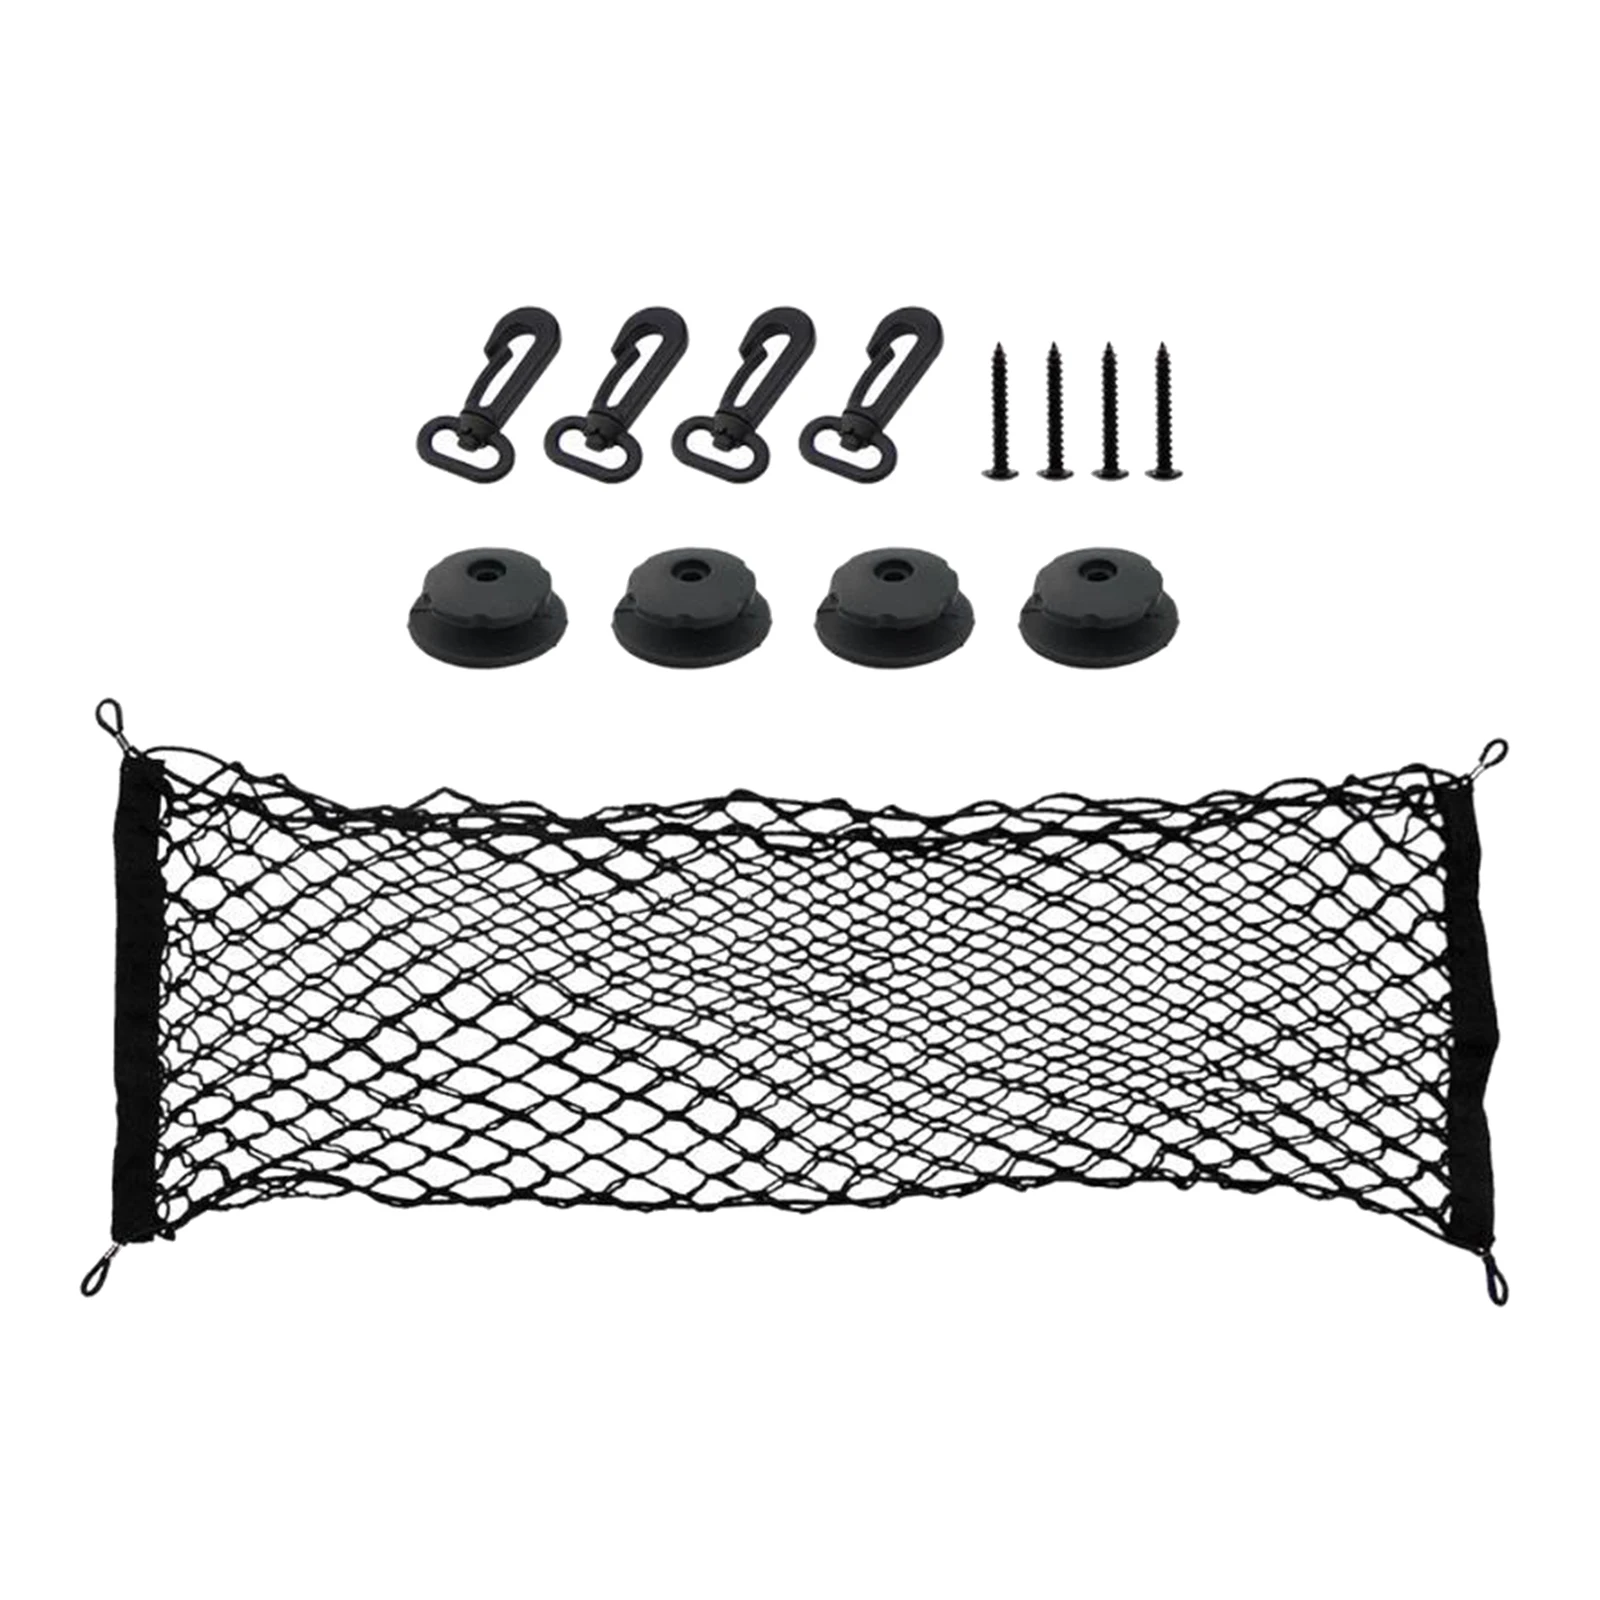 Universal Rear Trunk Mesh Elastic Cargo Storage Net Pocket with Mounting Accessories for SUV Truck